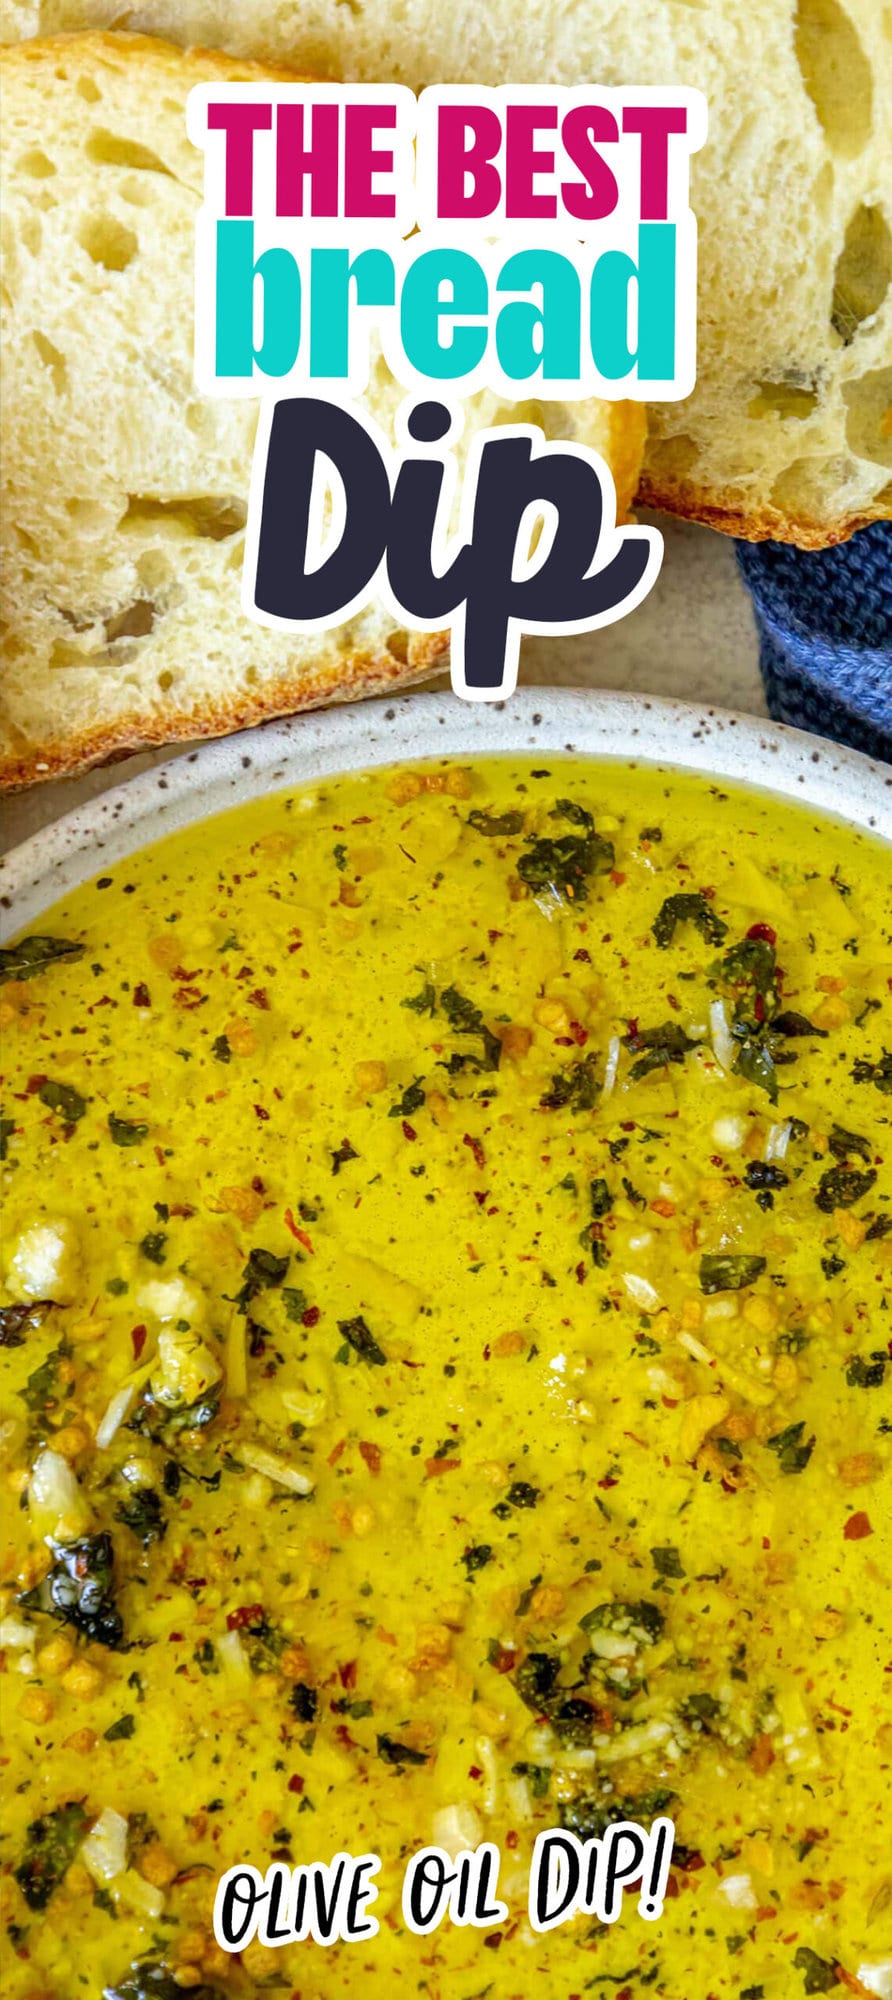 The easiest and best bread dip recipe with olive oil.